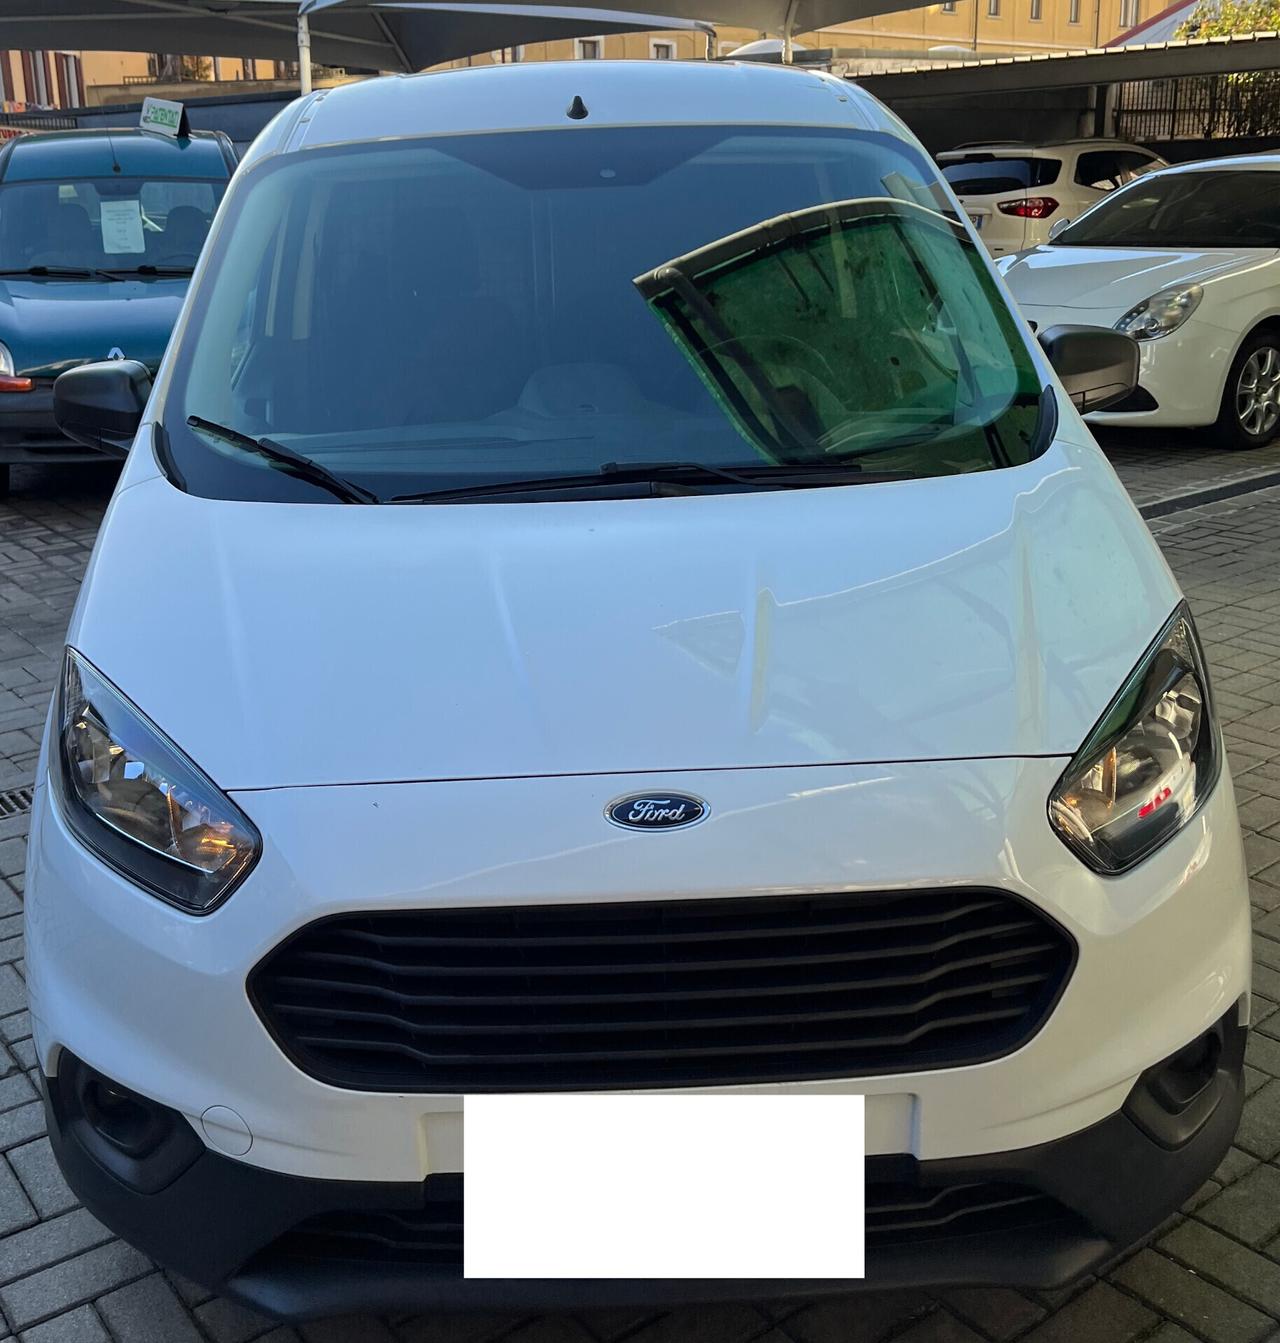 Ford Transit Courier 1.5 tdci - 2019